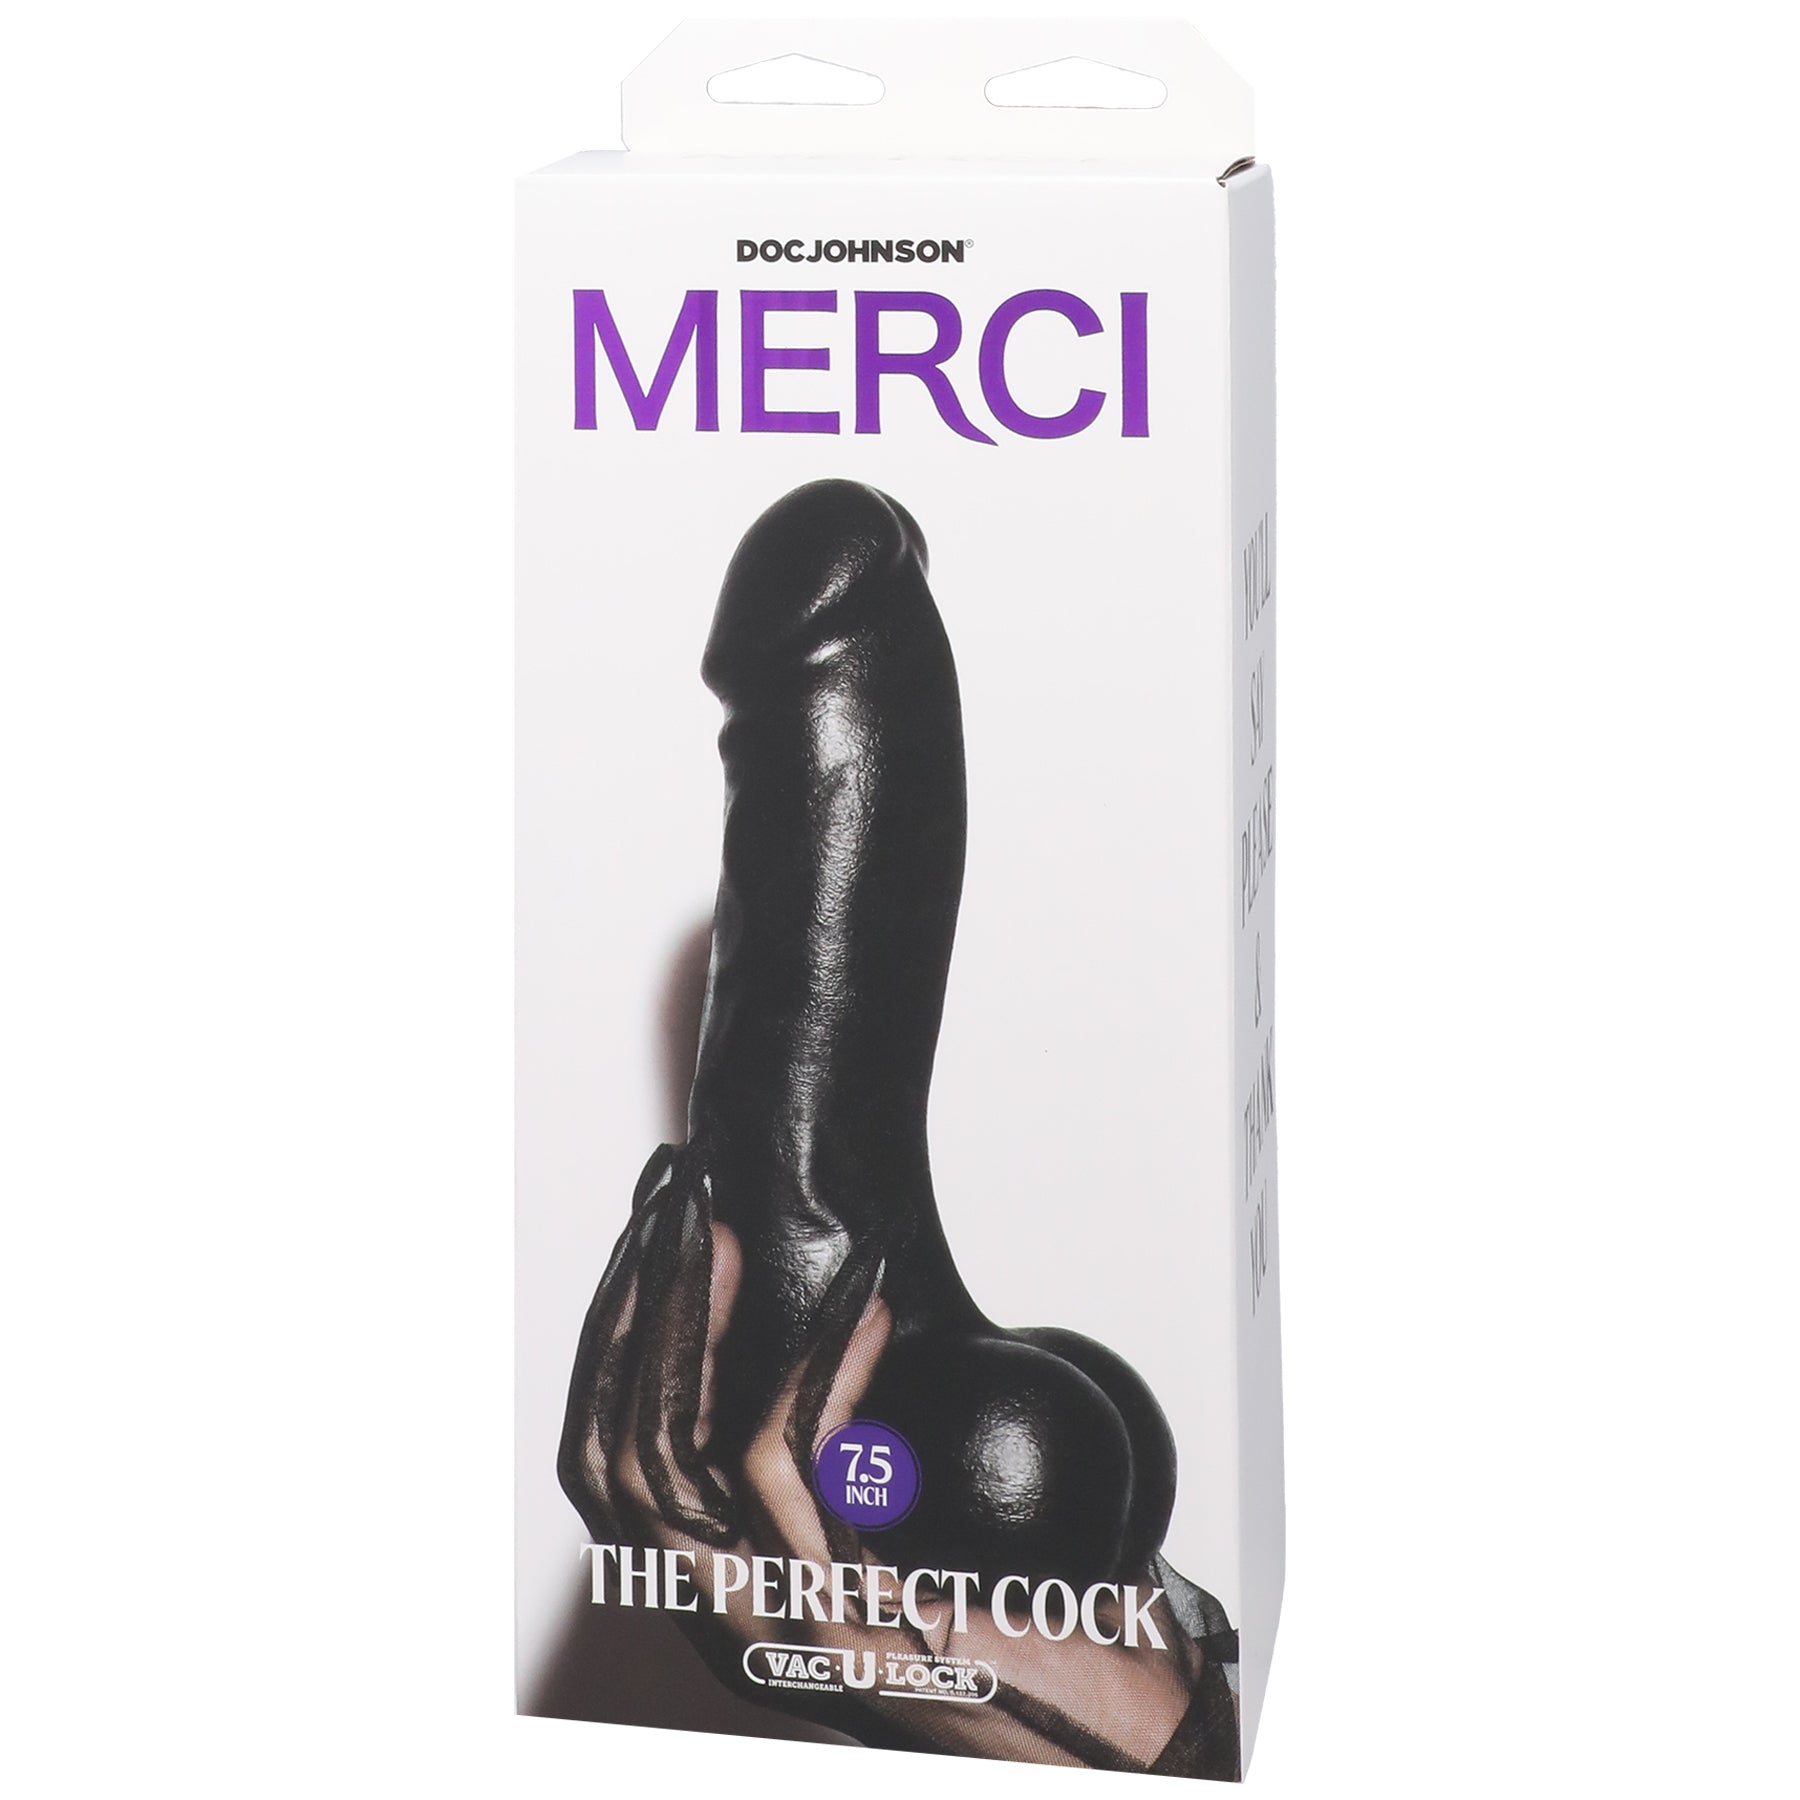 Merci - the Perfect Cock 7.5 Inch - With Removable Vac-U-Lock Suction Cup - Black-0